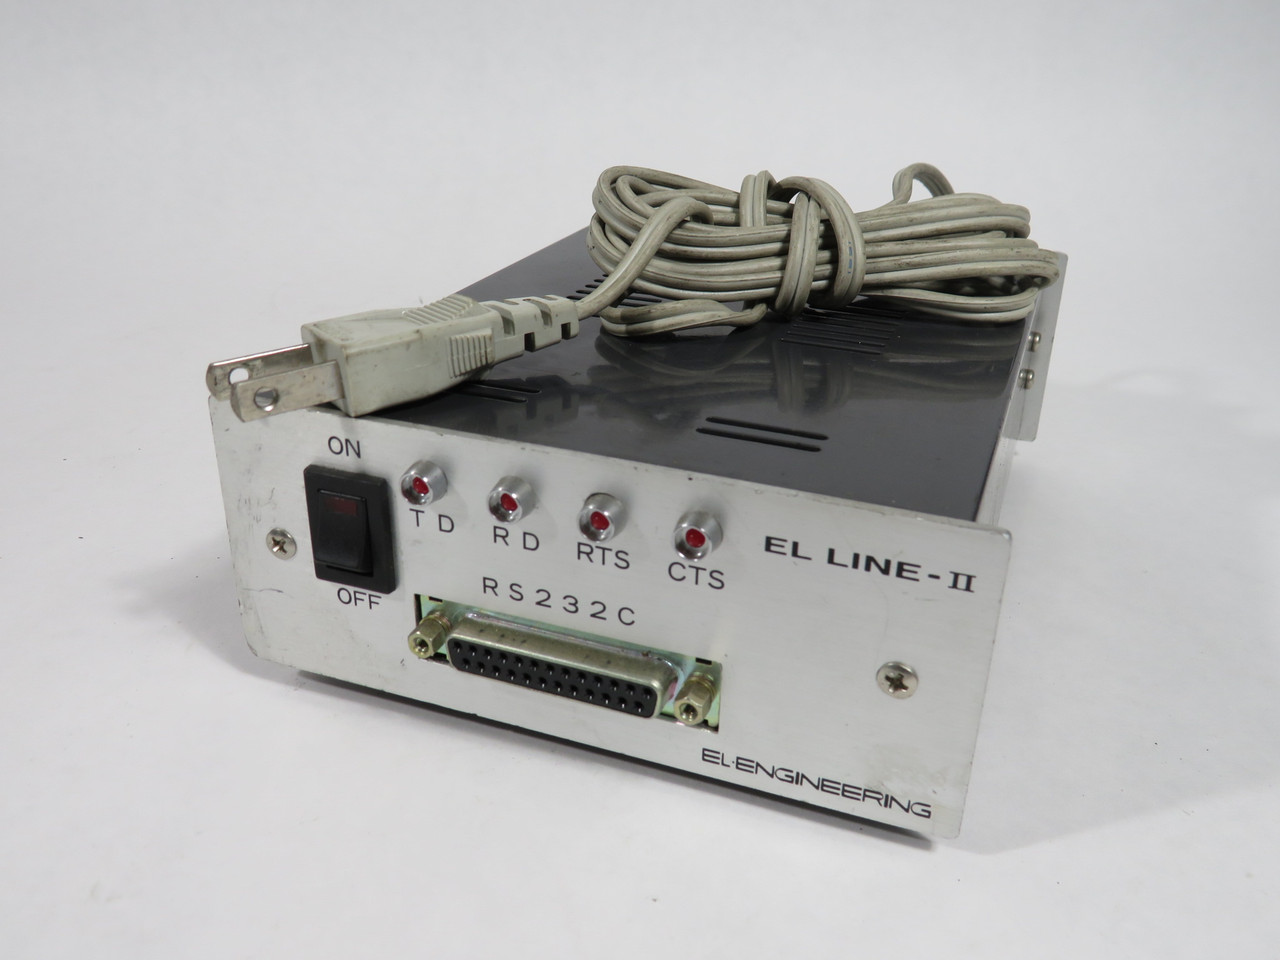 EL Engineering EL-Line II RS232C Communications Controller TD RD RTS CTS USED